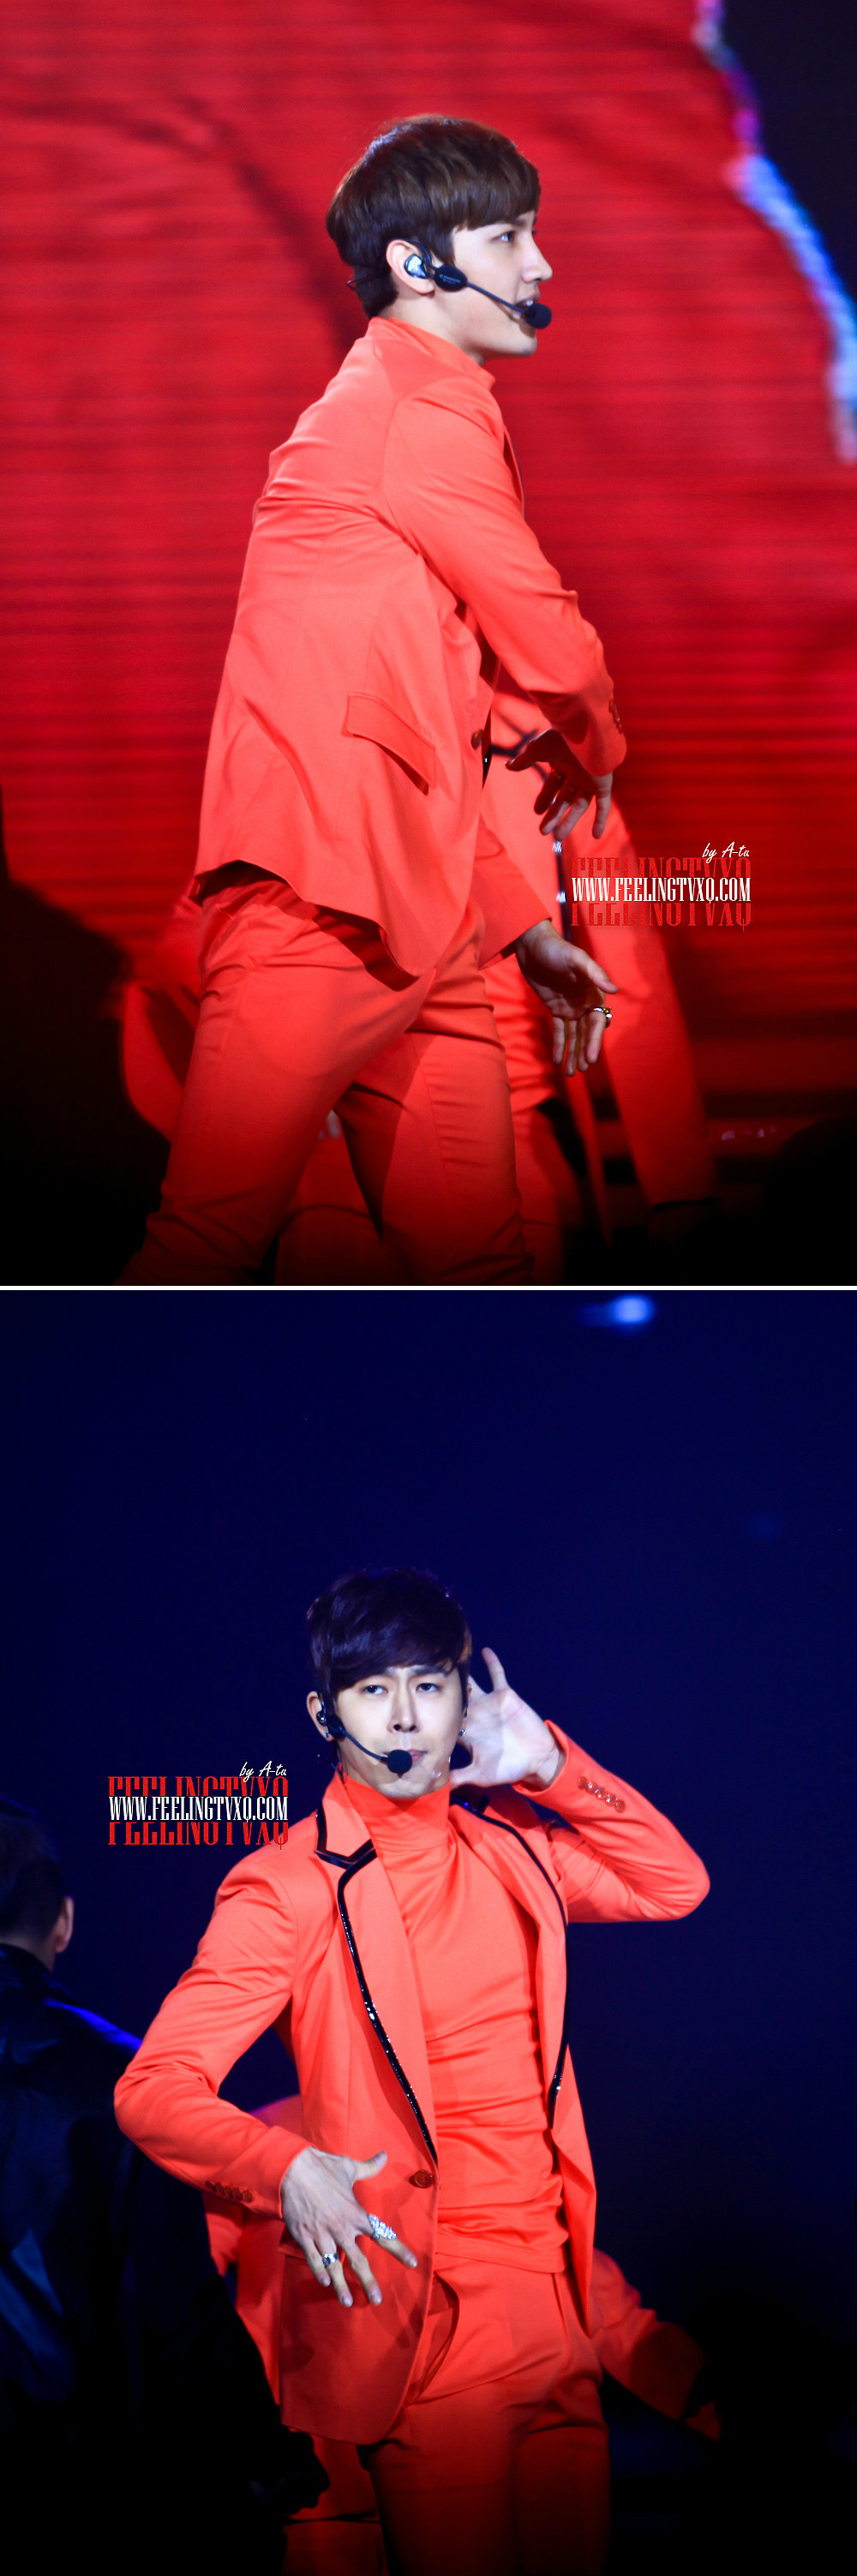 [22.12.12][Pics] TVXQ - Sichuan TV New Year's Eve Concert 6ca3641ctw1e04wyzoaoij